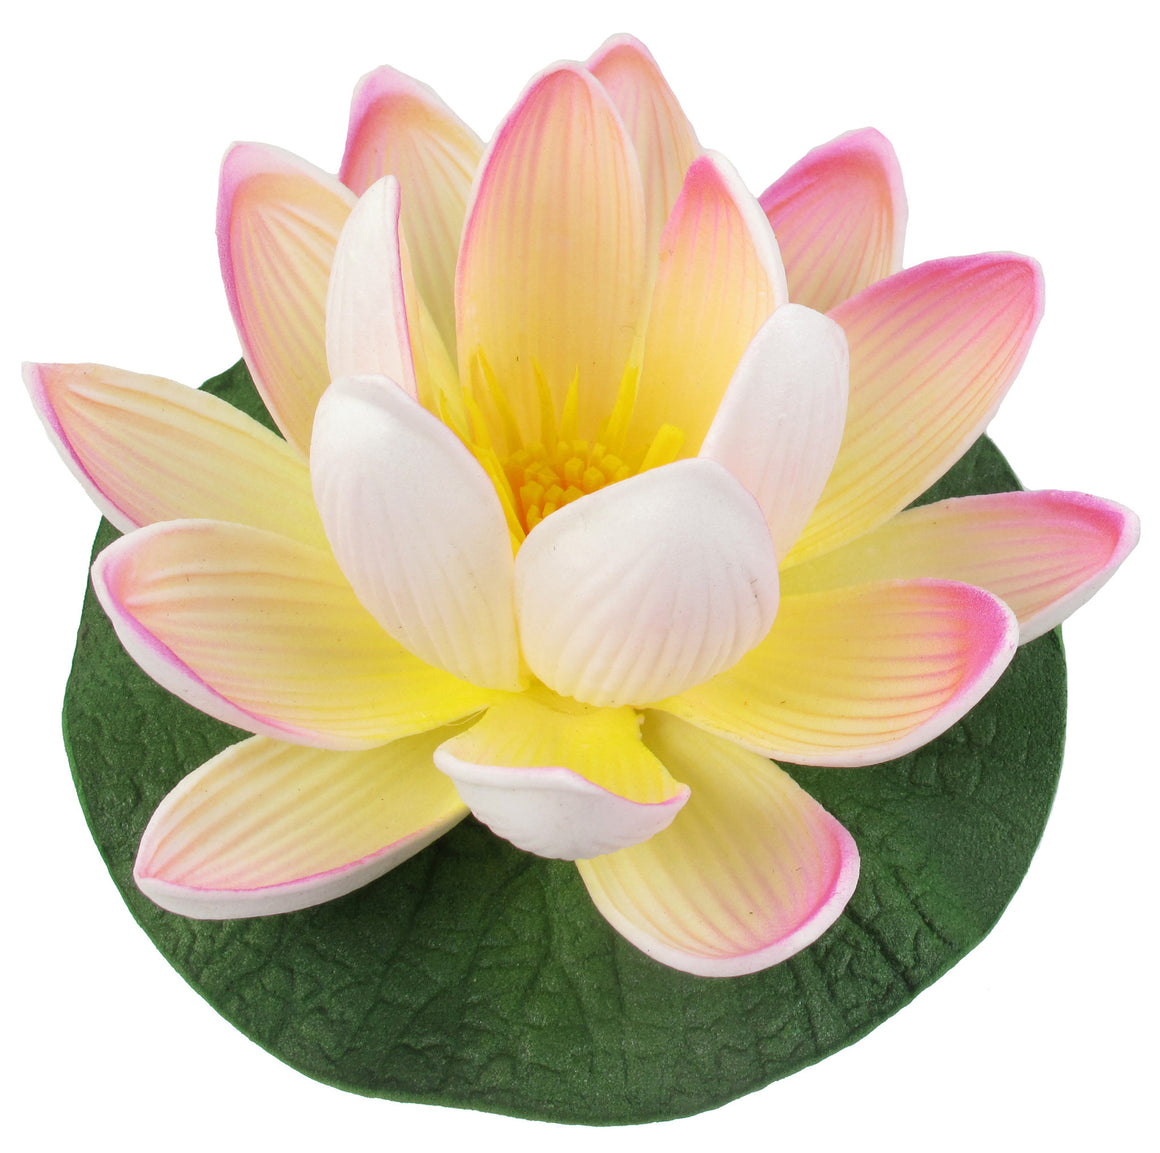 Small Floating Foam Water Lily Flower, For Small Water Feature, Approx. 3.25" x 3.25" x 2", Ivory-Pink - TropicaZona